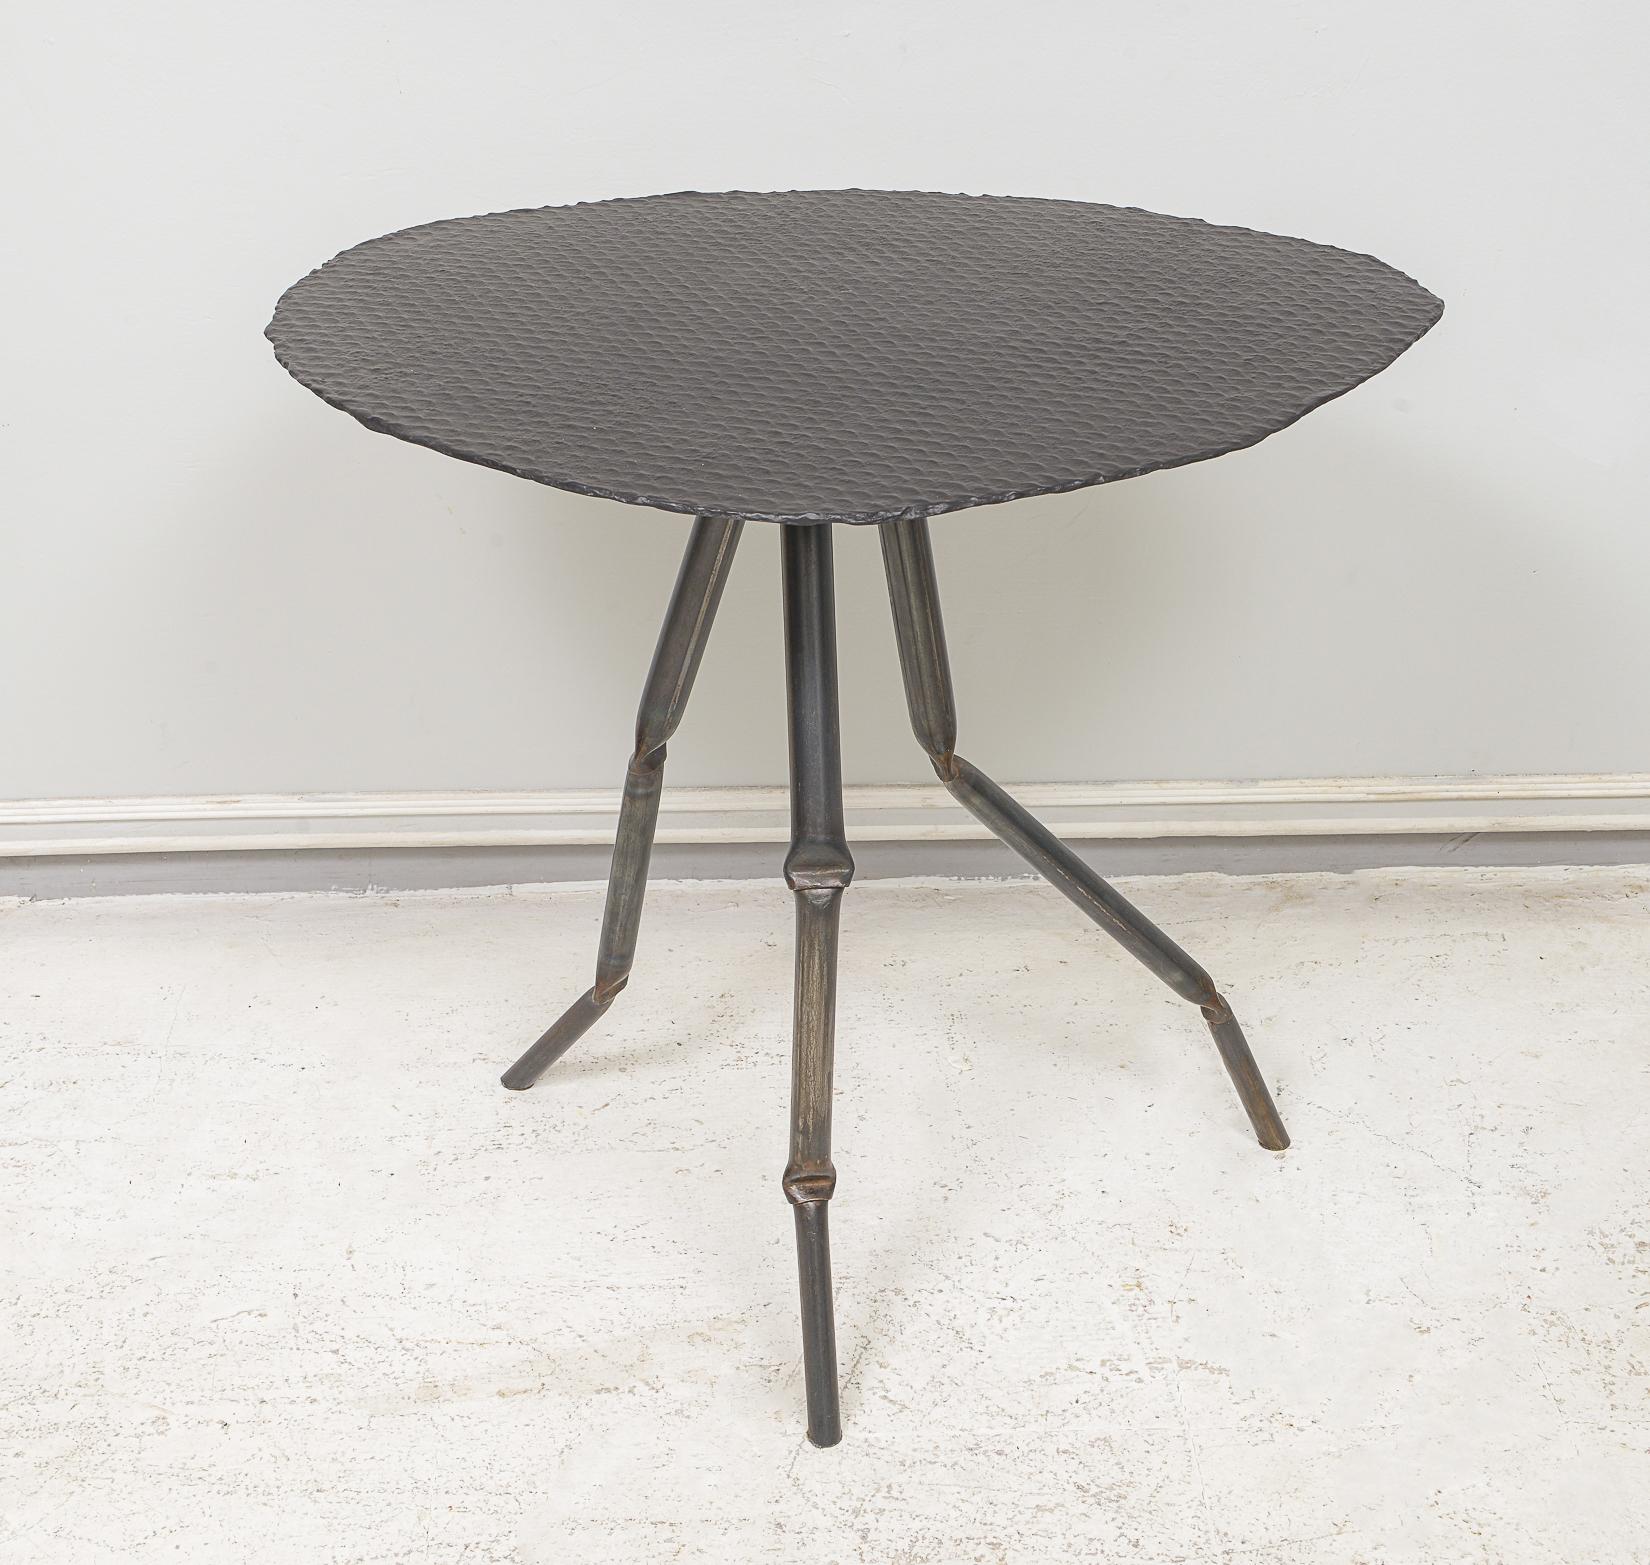 Custom French Araignee Side Table with steel legs
The top is made of paper - This table can be custom-made 
to your specifications.
Lead Time is up to 12 weeks. Please inquire. 
We currently have one available.